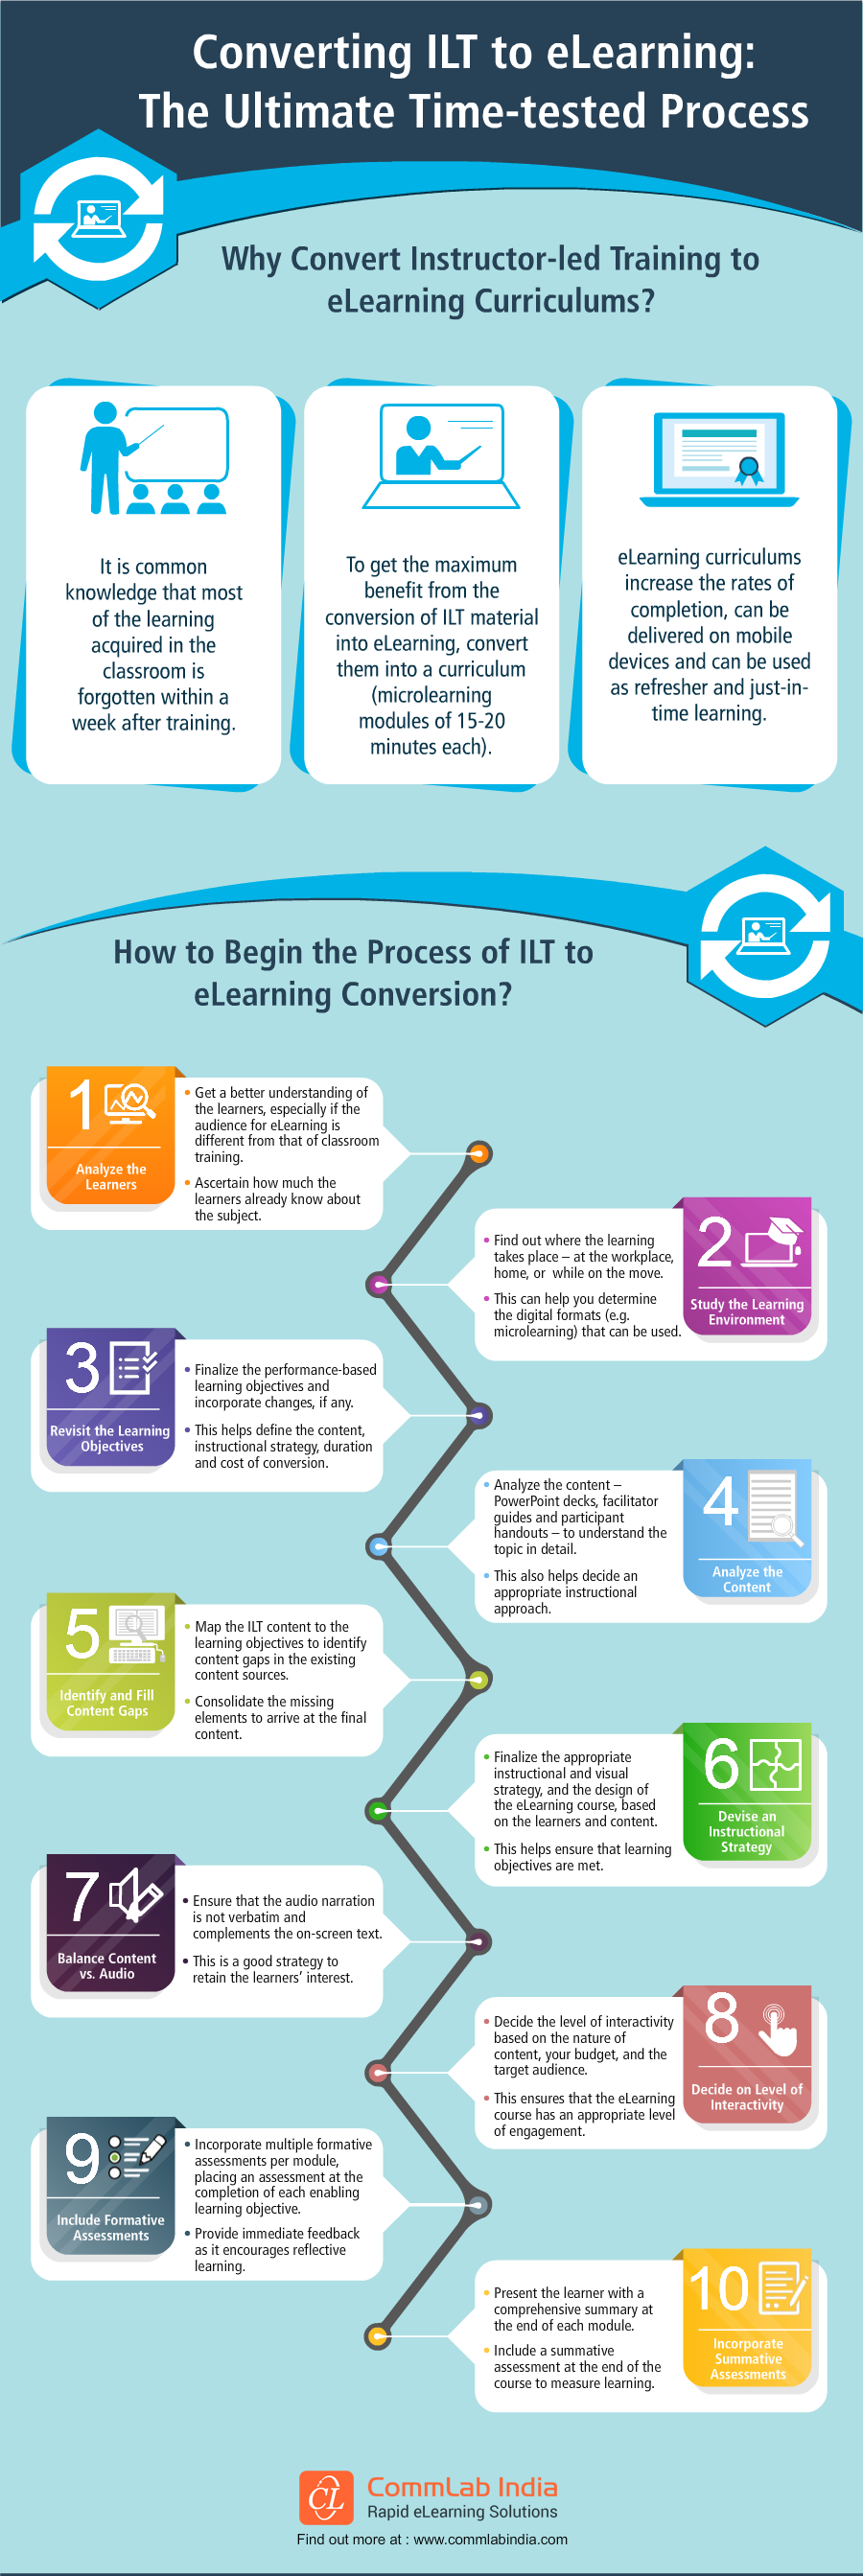 Converting ILT to eLearning: The Ultimate Time-tested Process [Infographic]